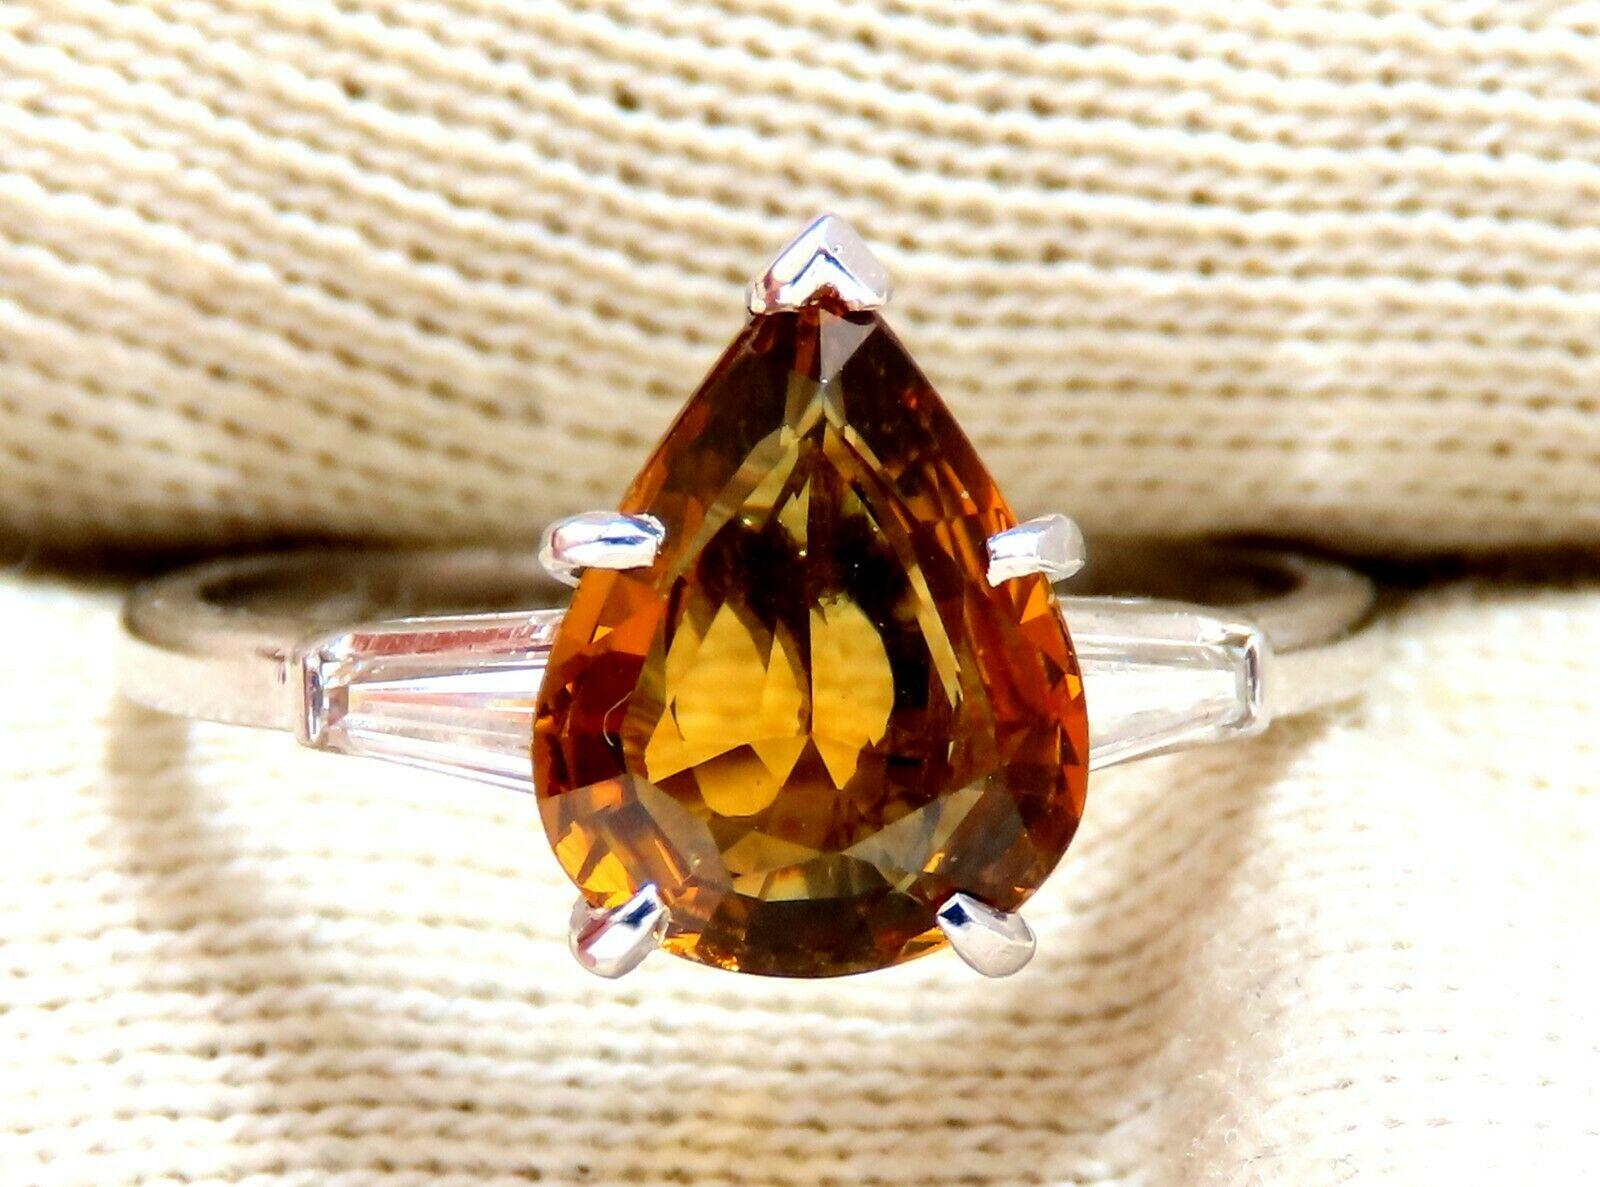 Yellow Brown Orange Classic Sapphire ring. 2.36ct. Natural GIA Certified Sapphire Ring

Report ID: 5211639173

10.25 X 7.99 X 3.41mm Full cut pear

Clean Clarity & Transparent

Platinum

3.8 grams

Ring Current size: 7

Depth of ring: 7mm

$7,000